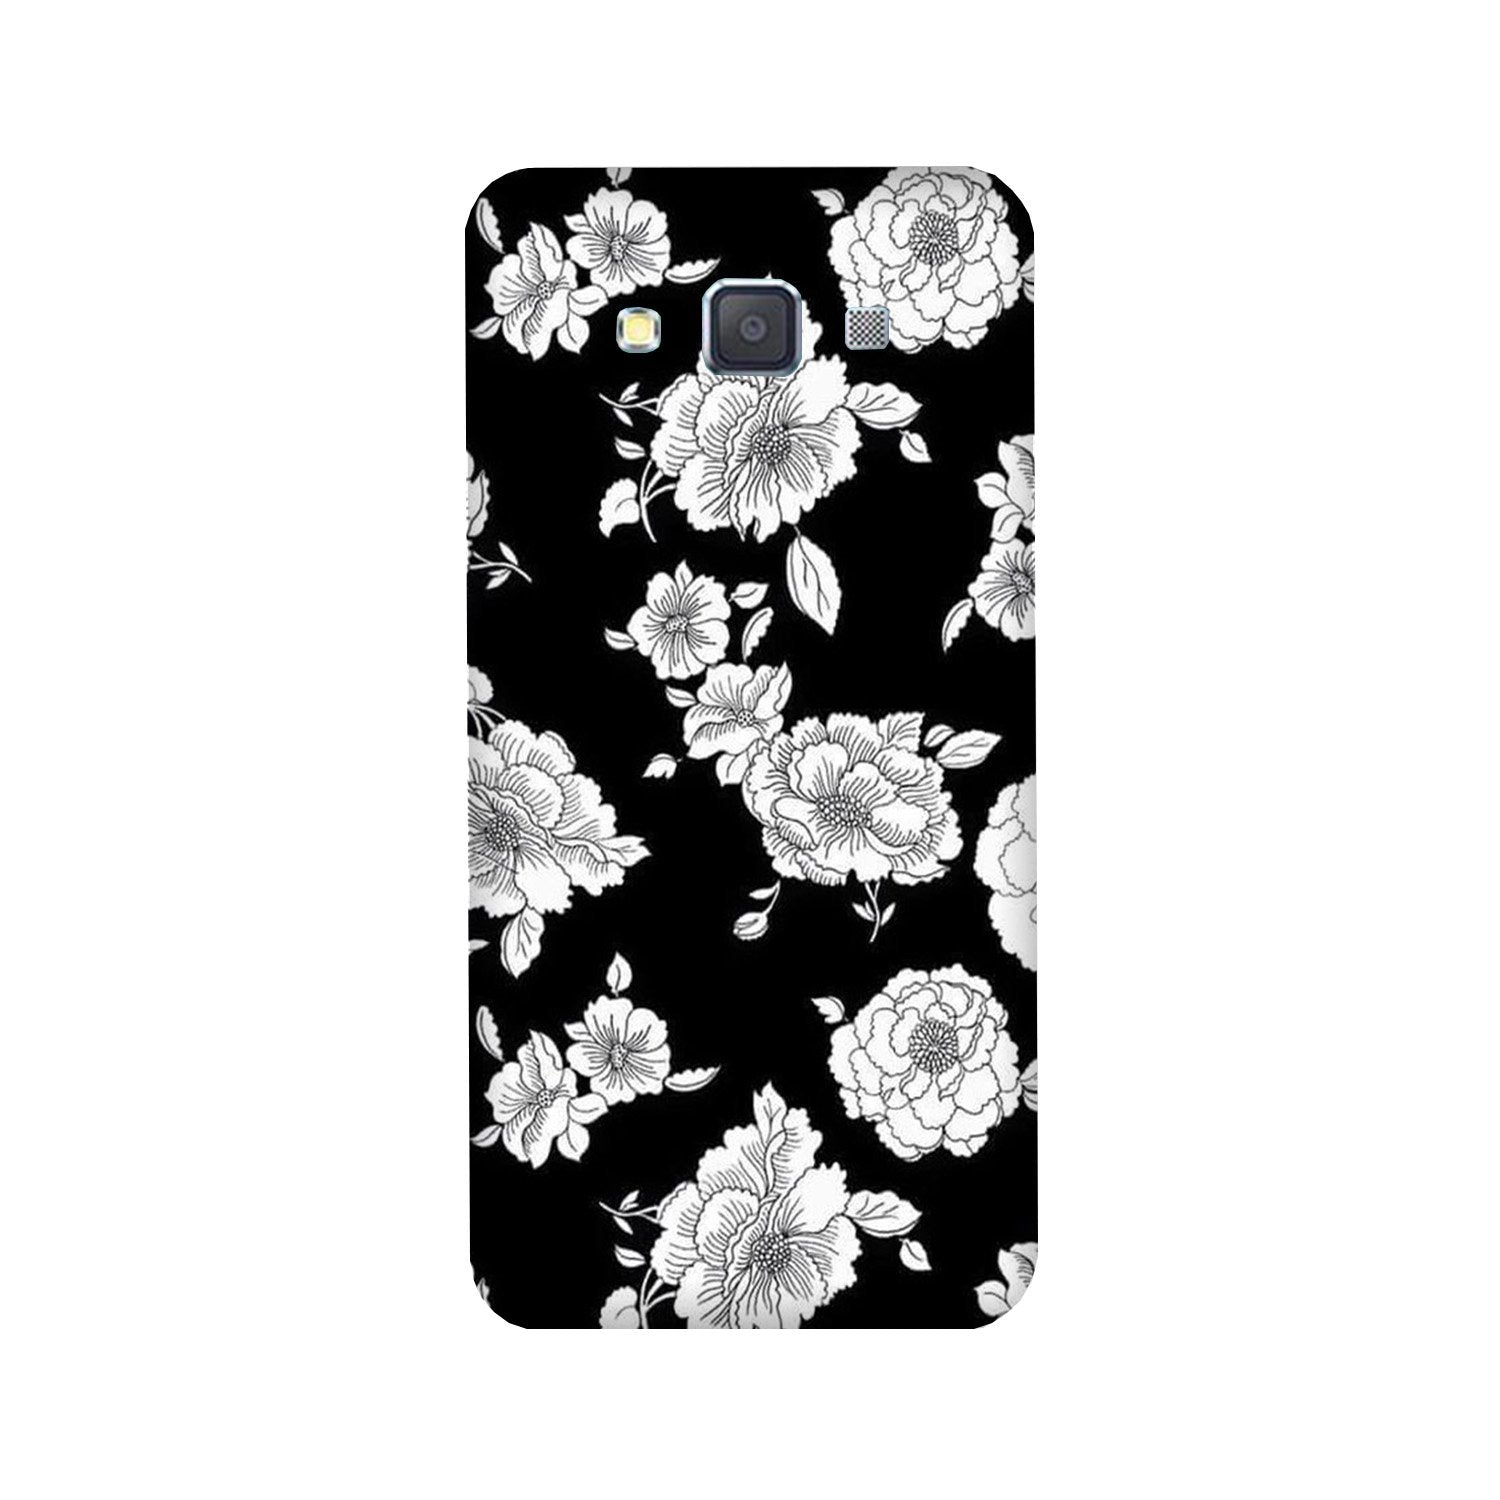 White flowers Black Background Case for Galaxy ON7/ON7 Pro